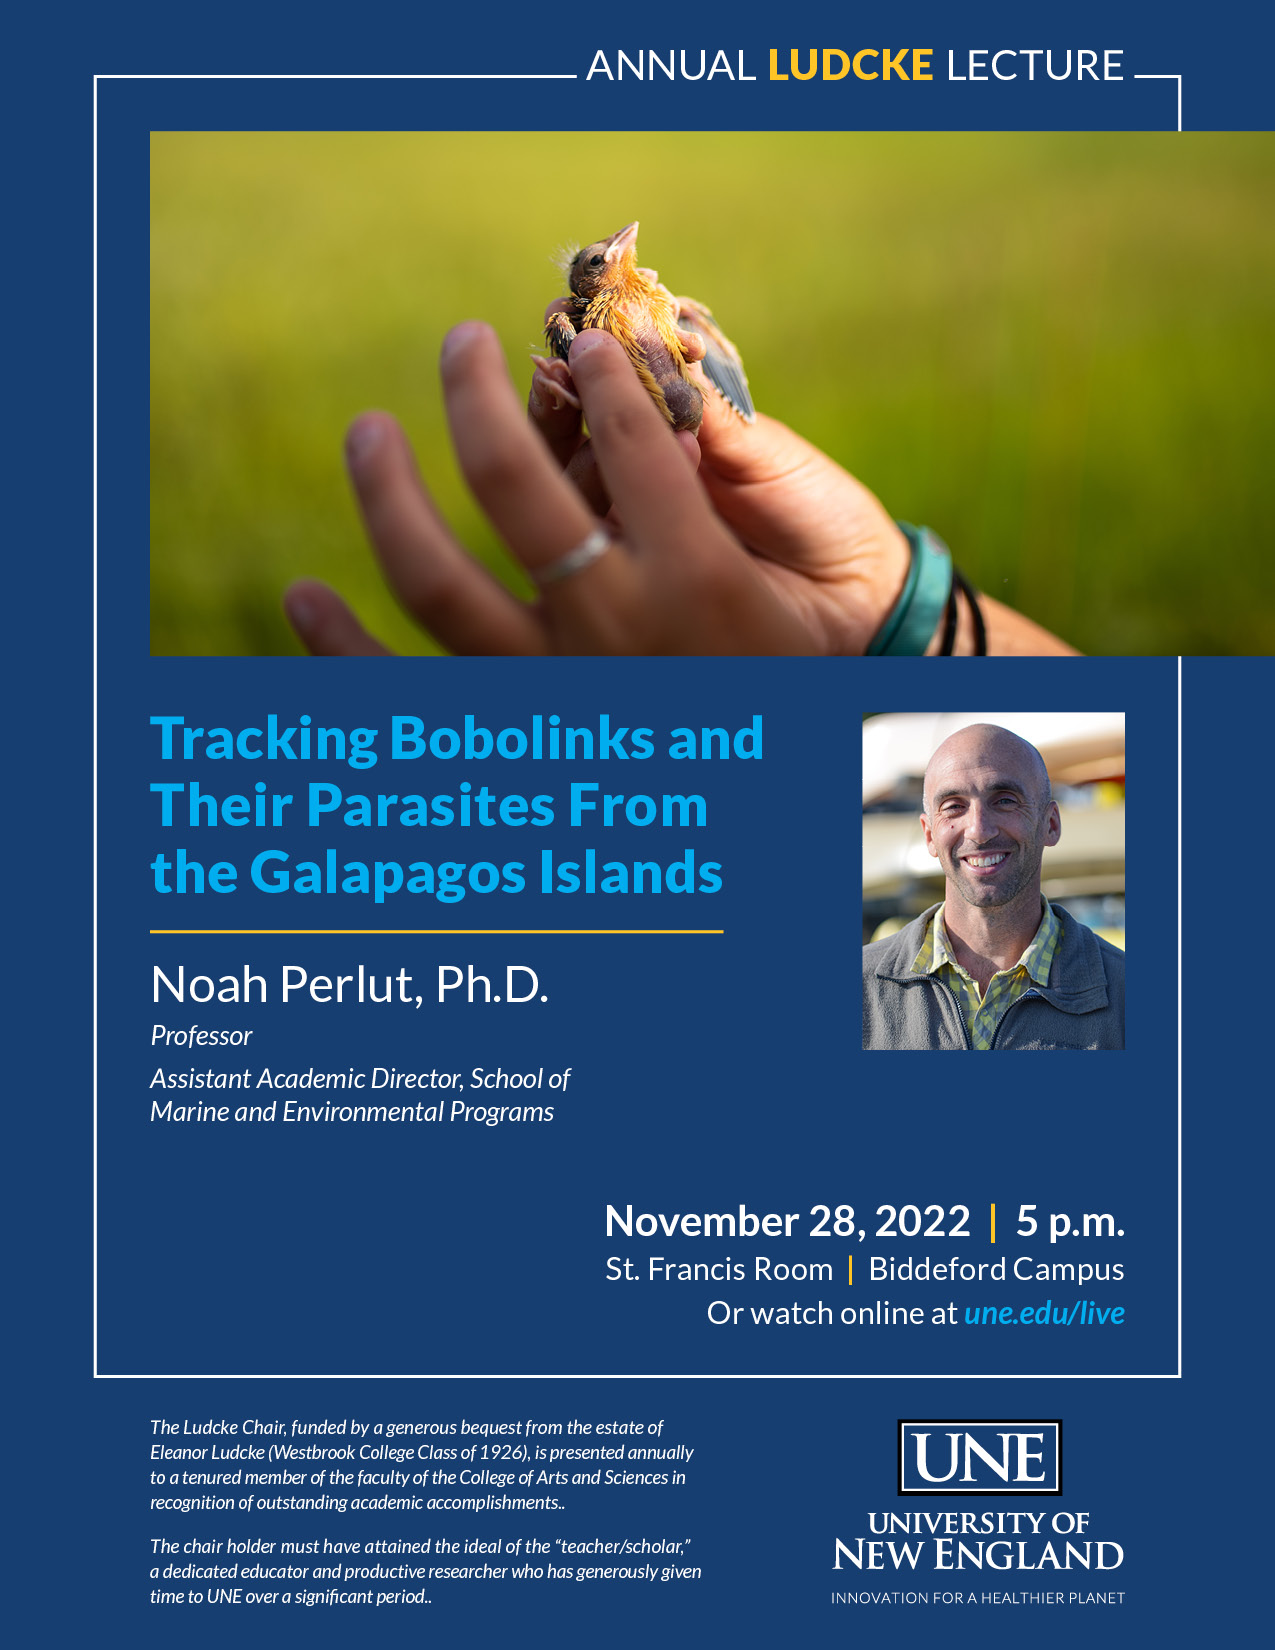 Poster for the 2022 Ludcke lecture event